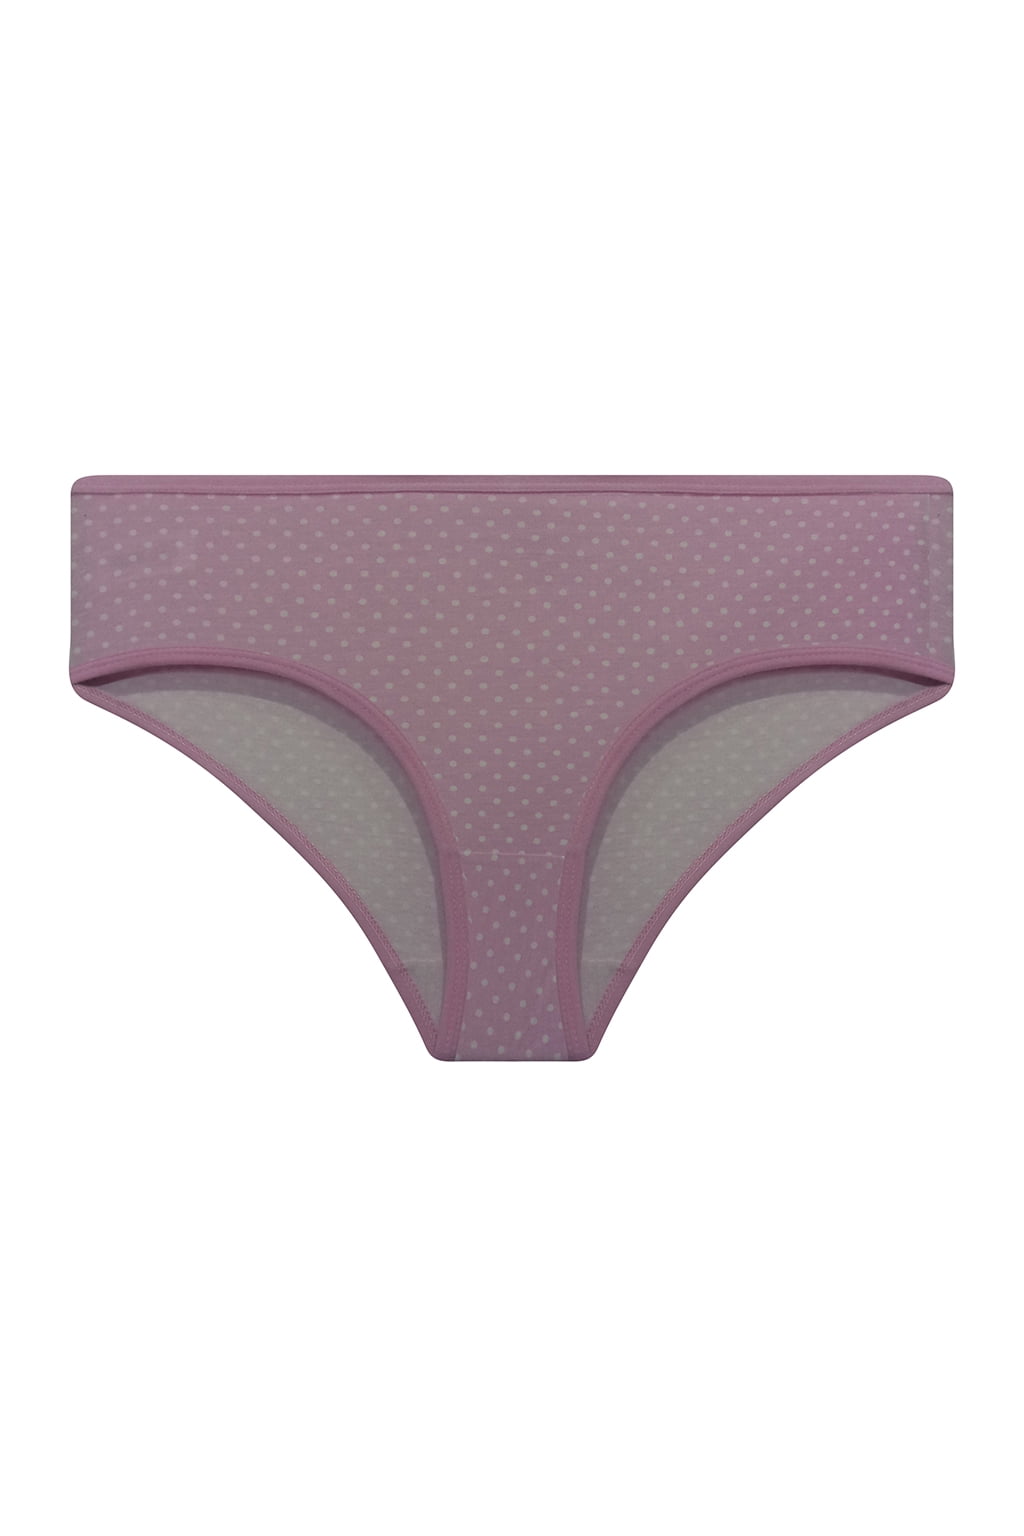 Clovia Mid Waist Polka Print Hipster Panty in Baby Pink - Cotton ...